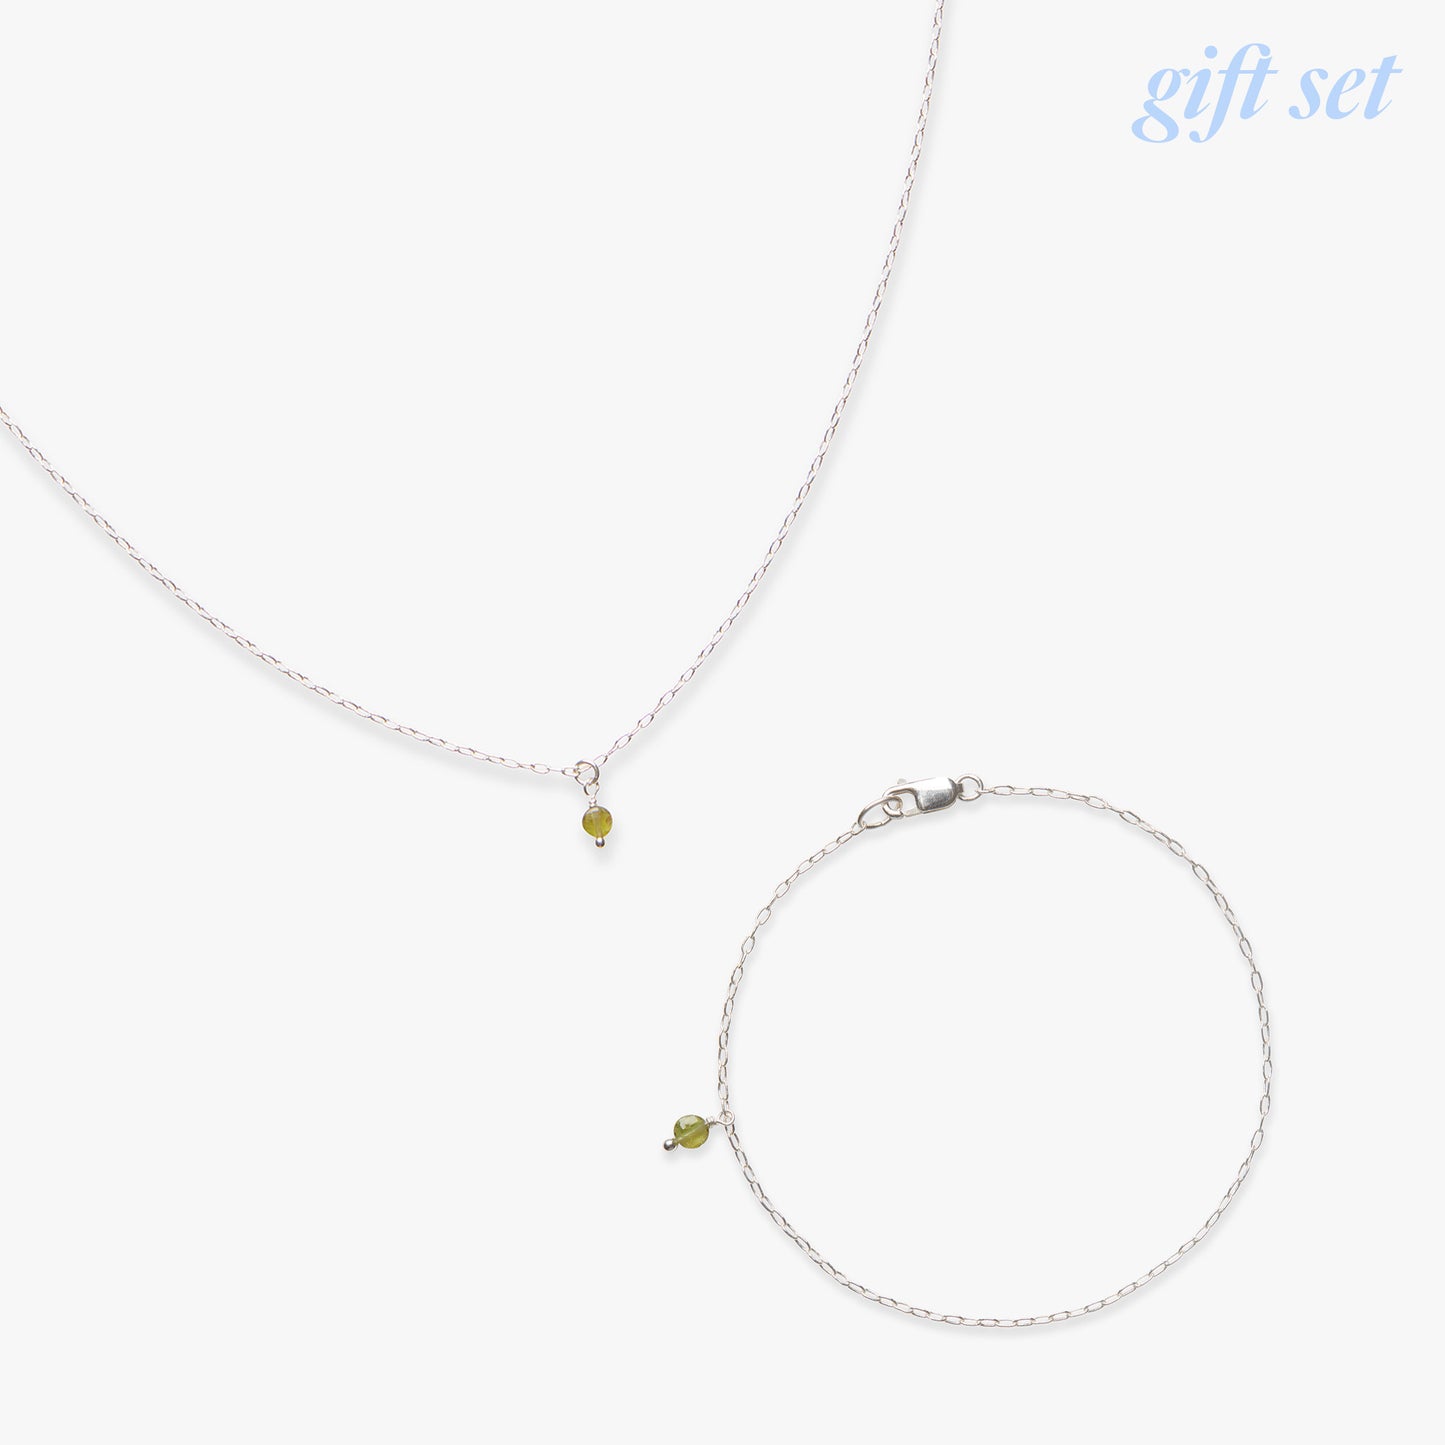 Mother's Day birthstone jewellery gift set silver